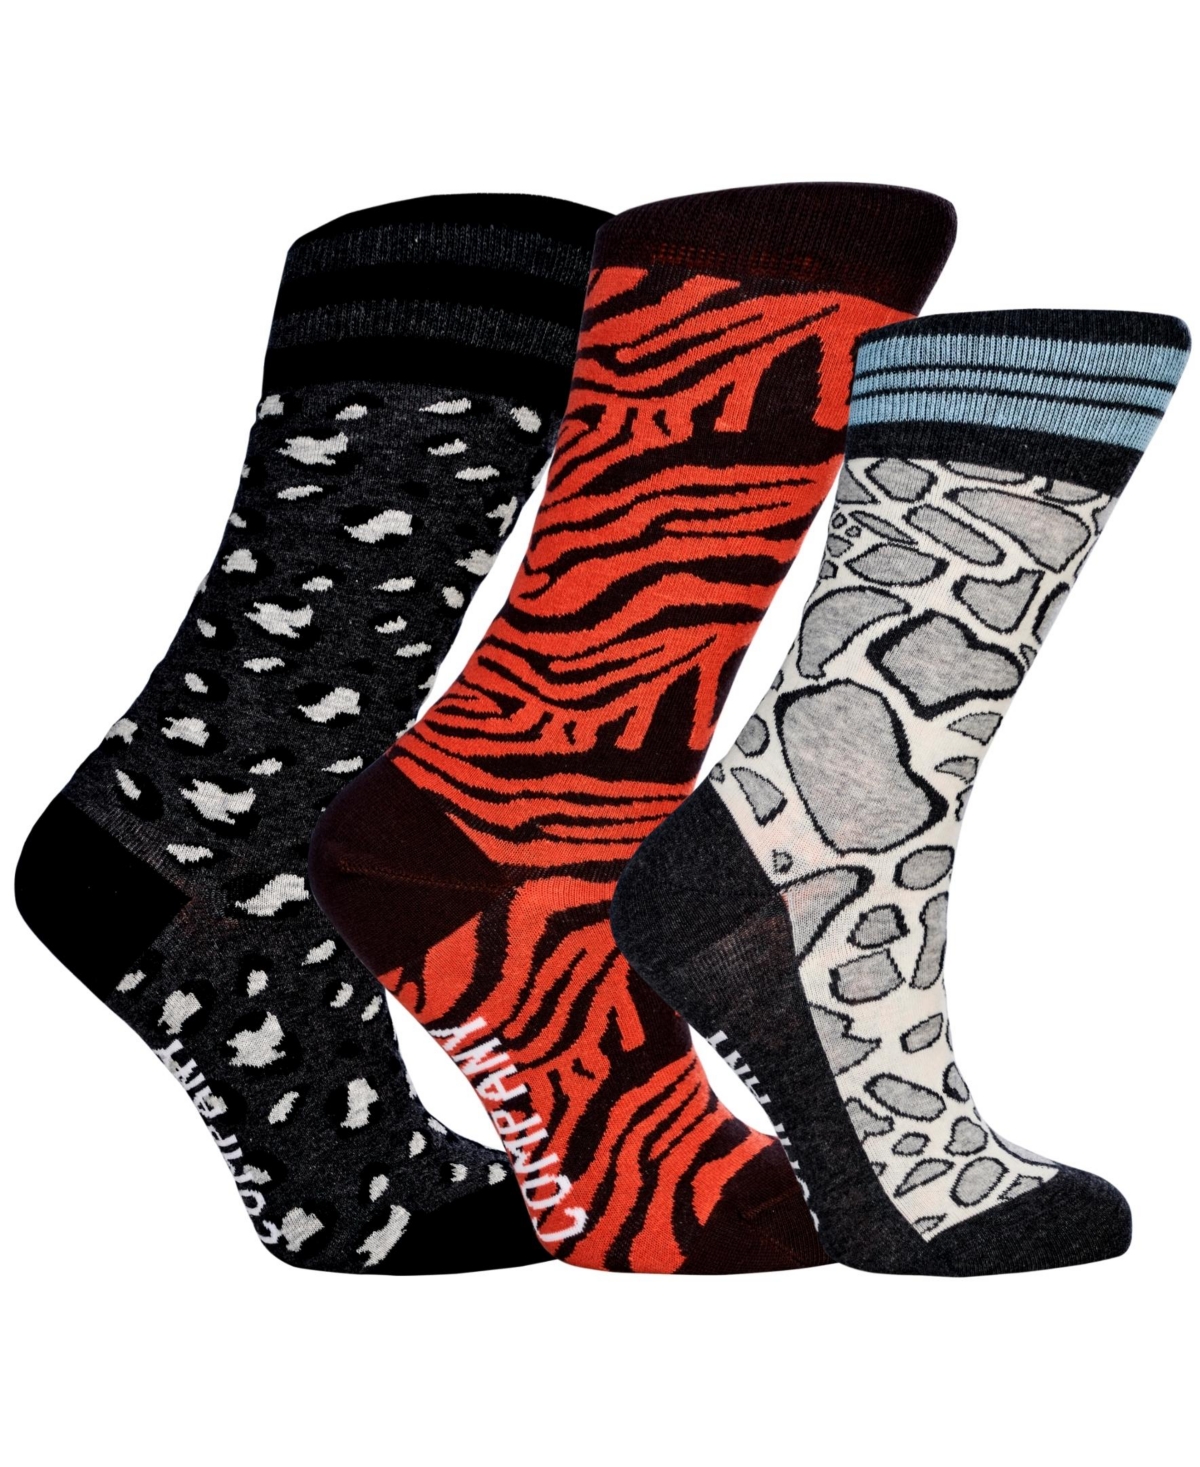 Love Sock Company Women's Wild Cats Bundle of Cotton, Seamless Toe Premium Colorful Animal Print Patterned Crew Socks, Pack of 3